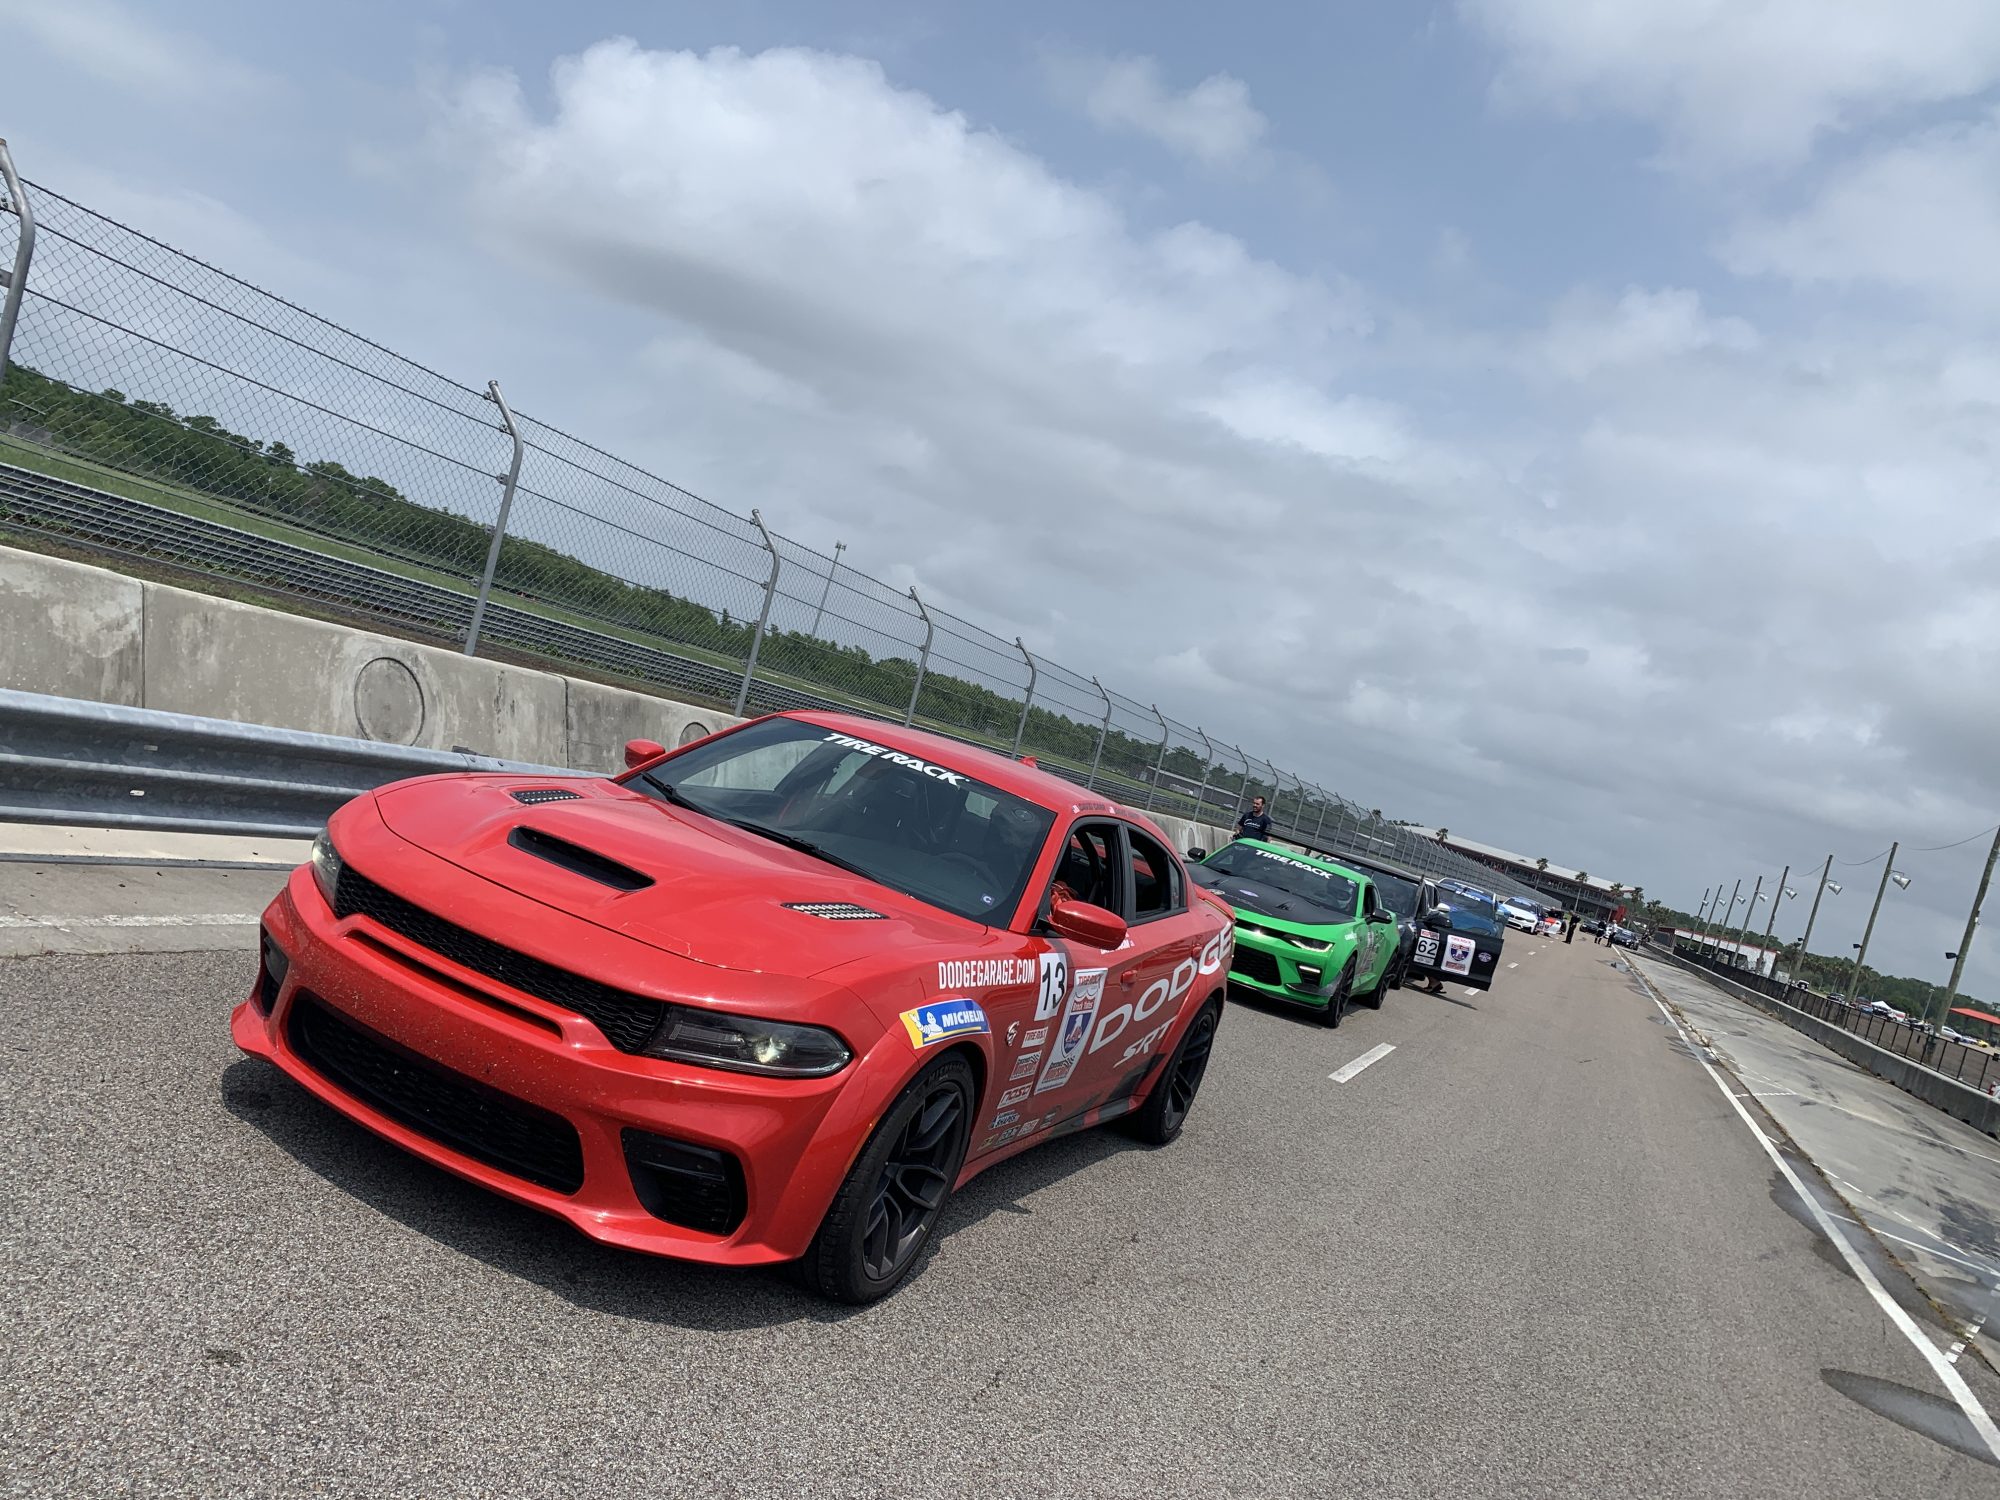 Charger SRT Hellcat Redeye racing in One Lap of America